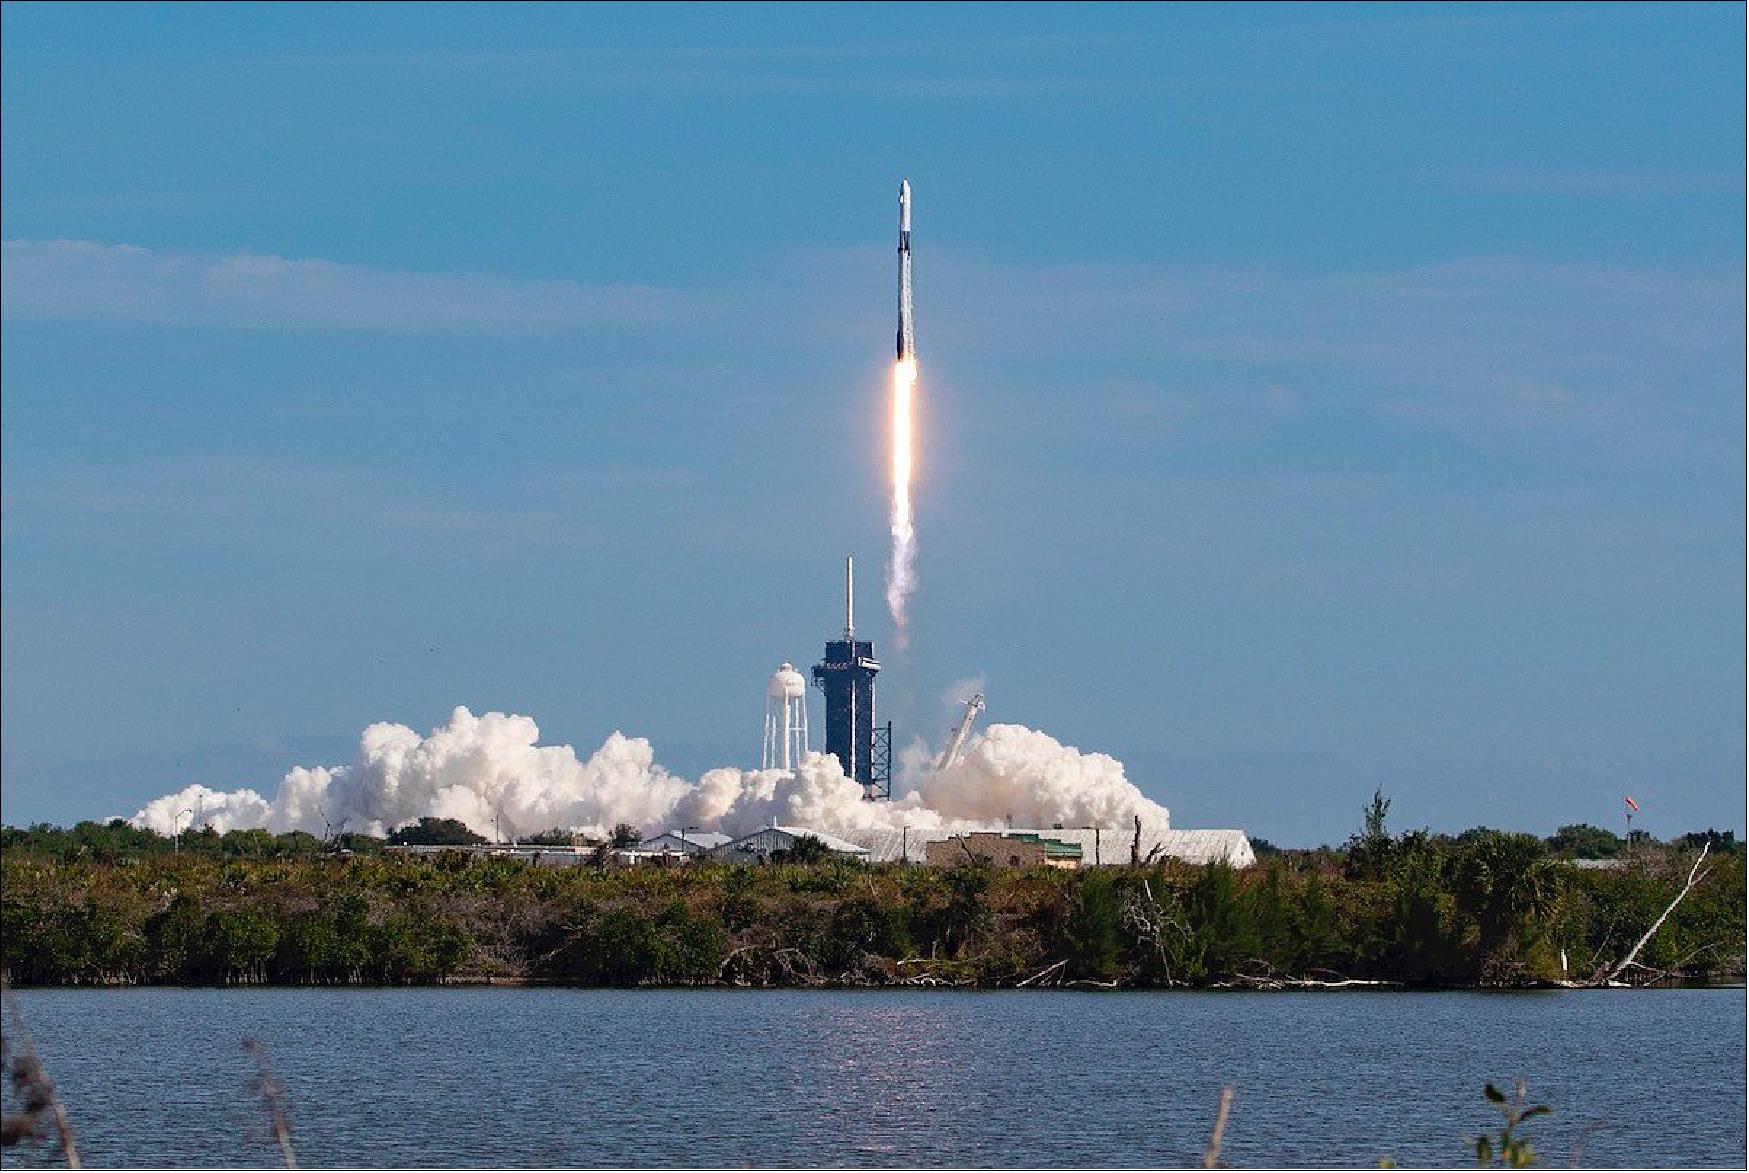 Figure 1: SpaceX’s Falcon 9 rocket climbs into the sky from pad 39A of KSC on its way to the ISS (image credit: Katie Darby / Spaceflight Now)